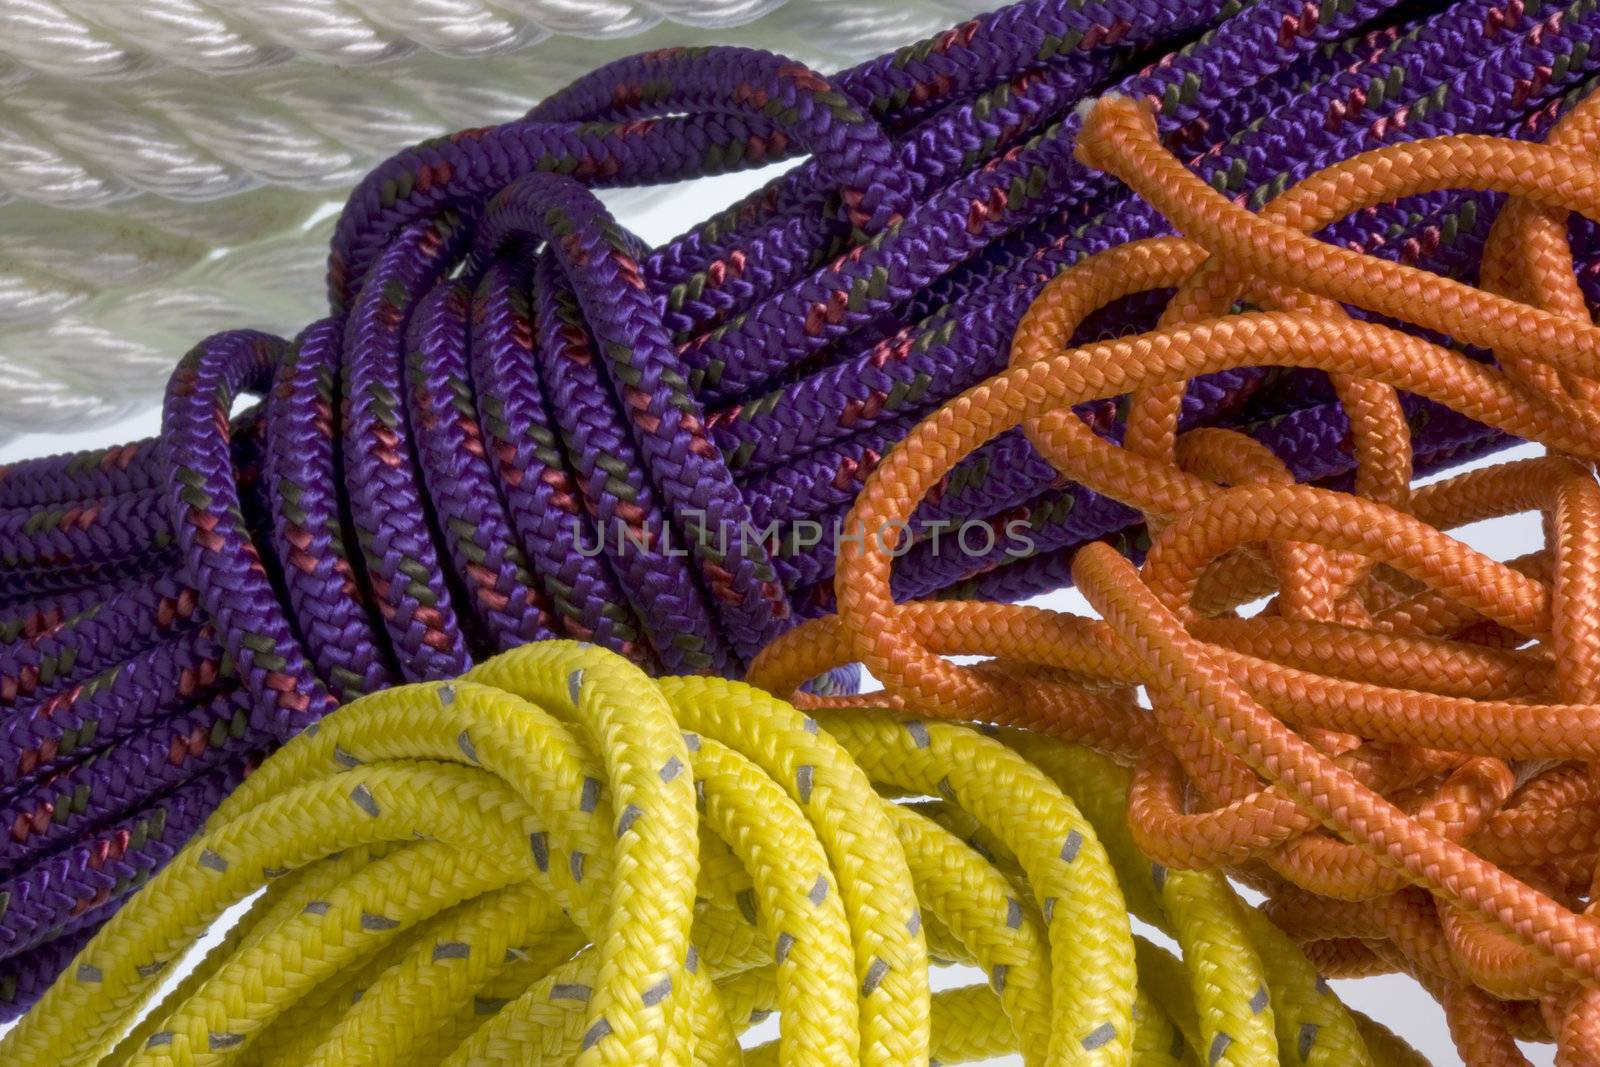 background of colorful, nylon ropes and cords coiled and chaotic